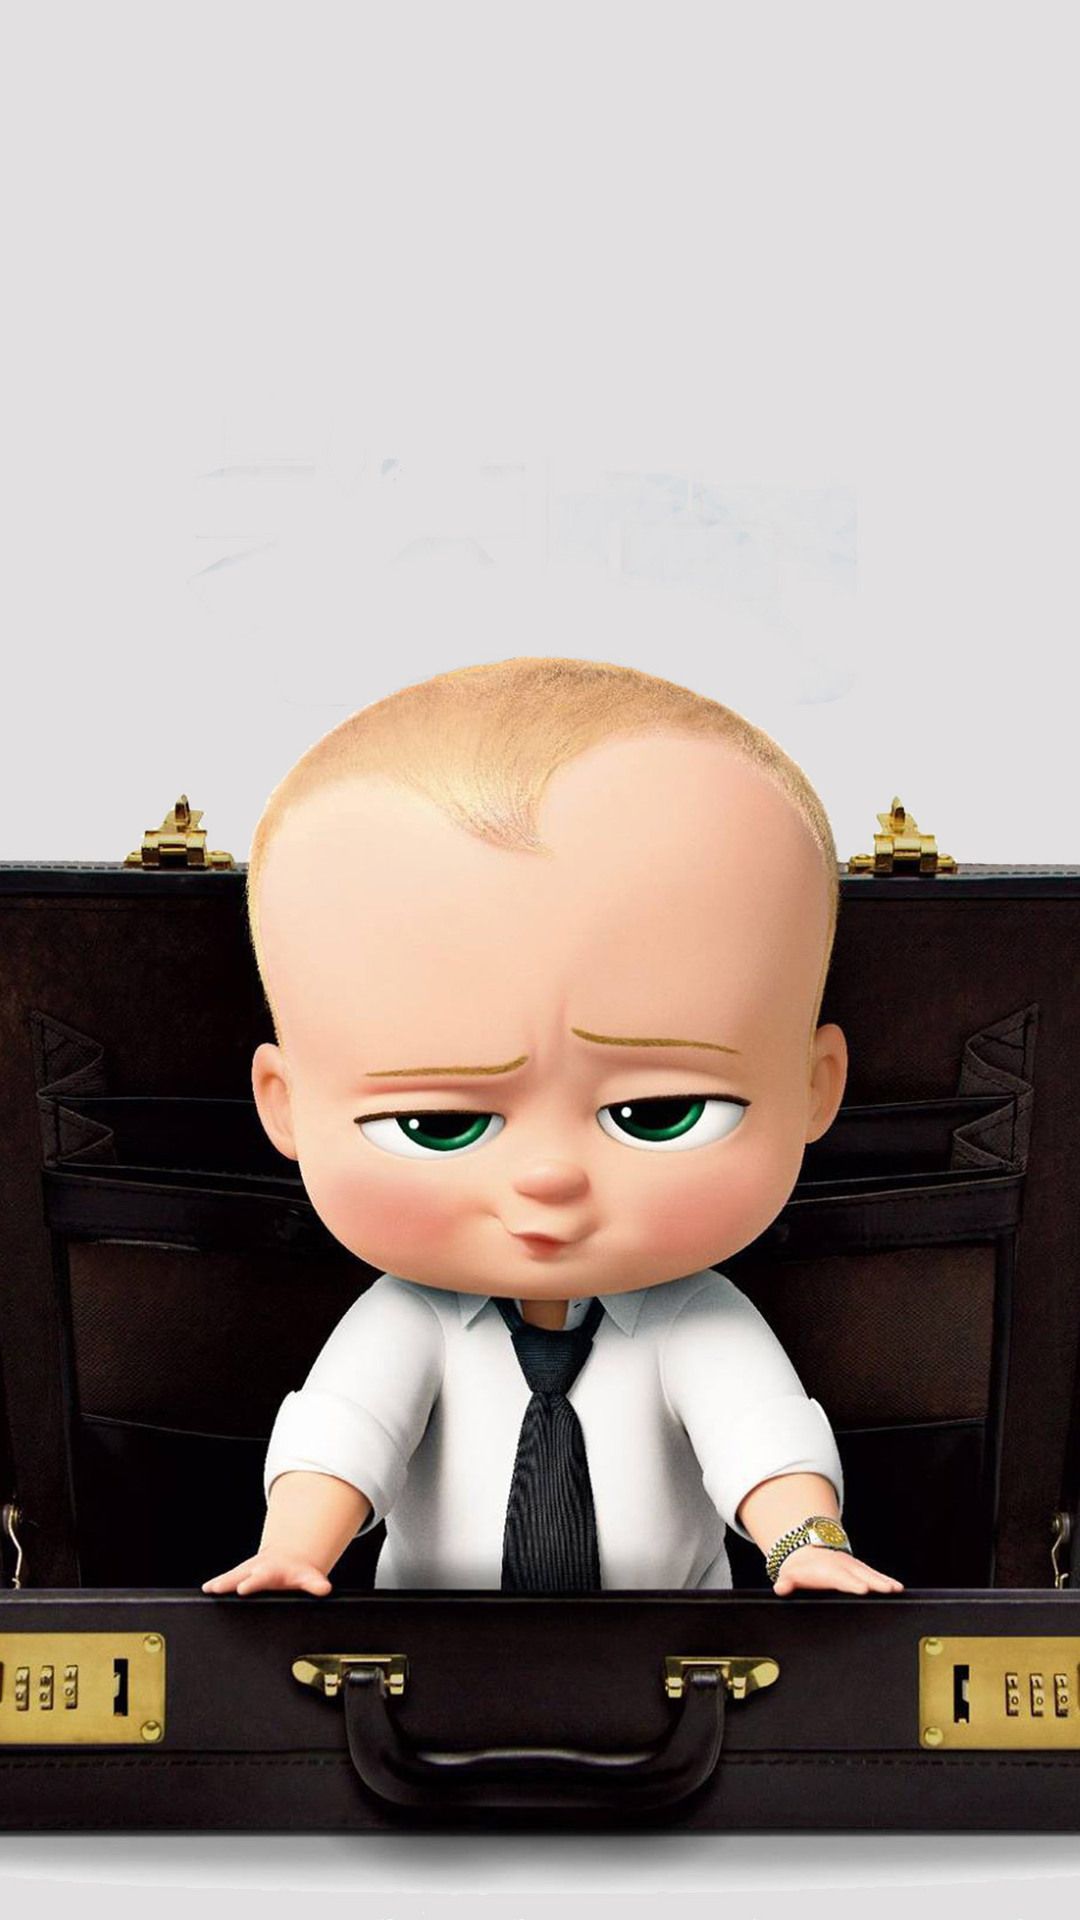 Top Image Boss Baby Tim Wallpaper HD Image Collection